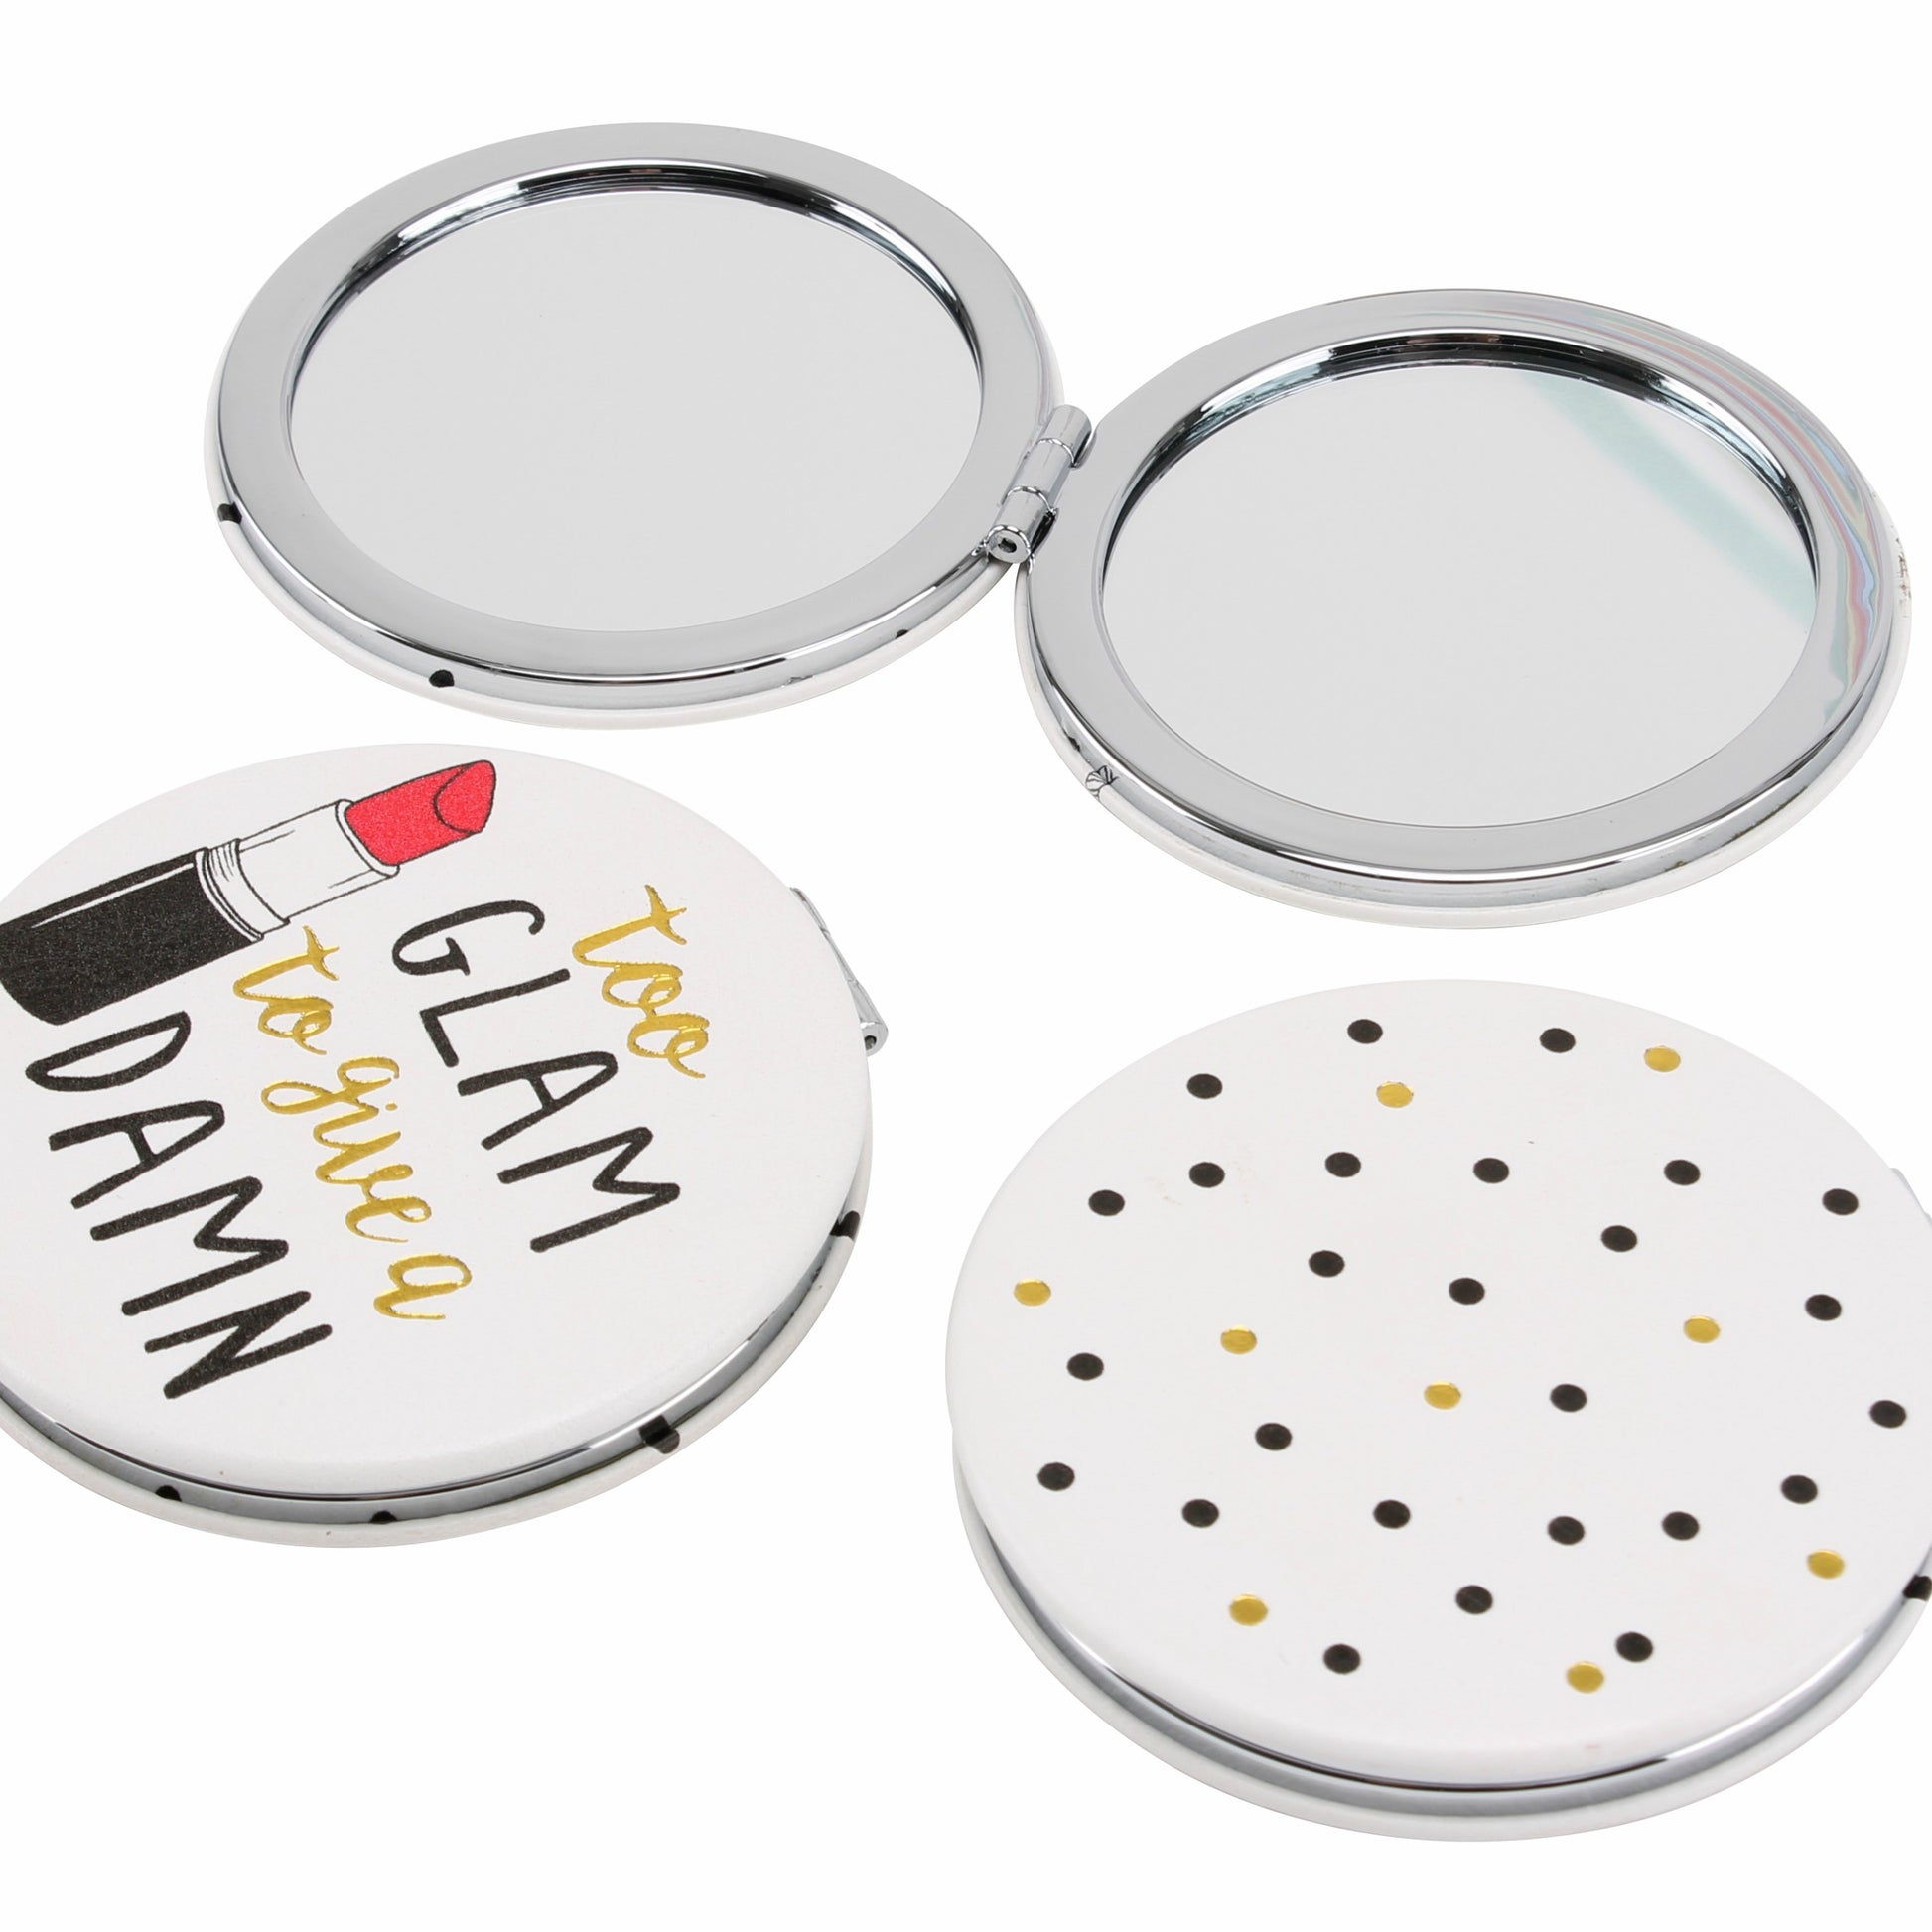 White fabulous let's make up compact mirrors with choice of glam, sassy, selfie or sparkle slogan